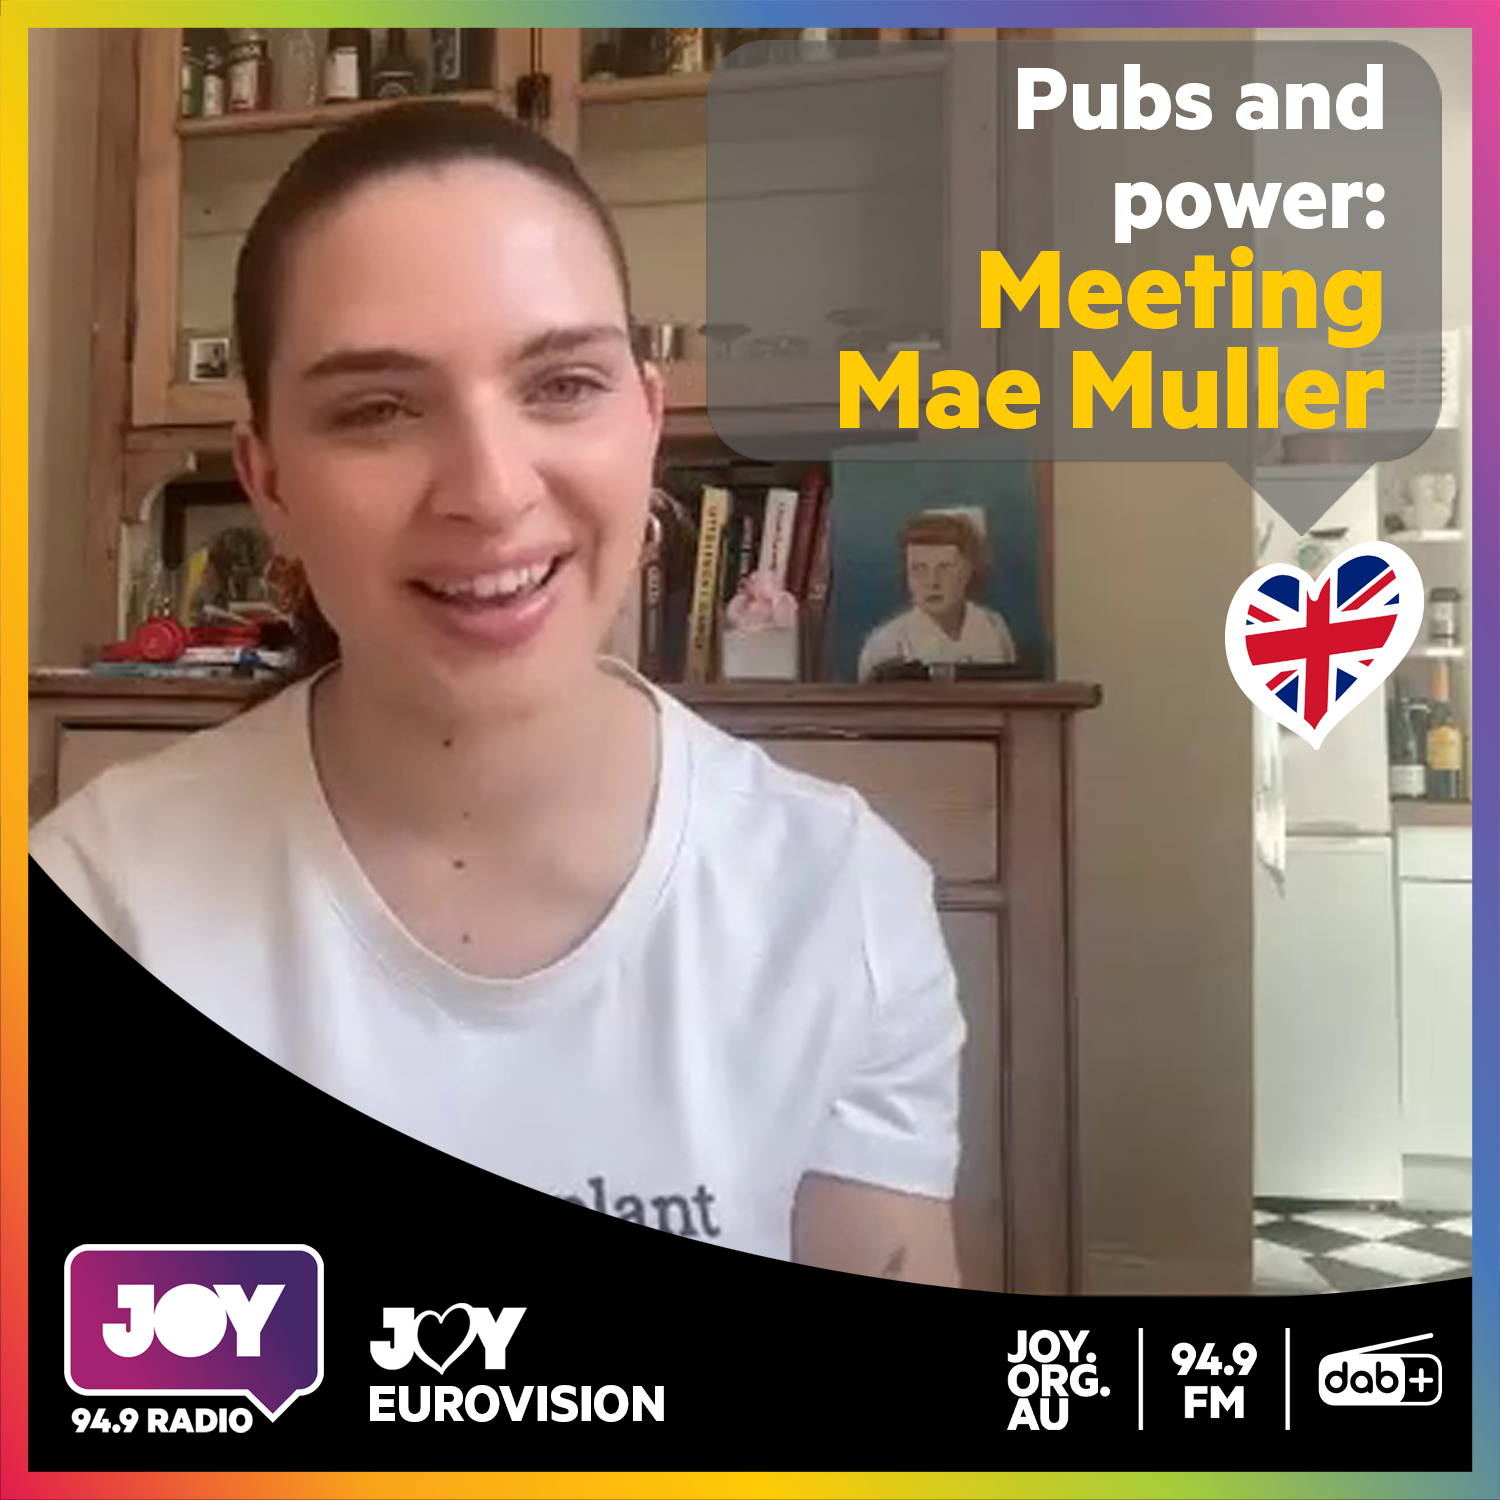 🇬🇧 Pubs and power: Meeting Mae Muller